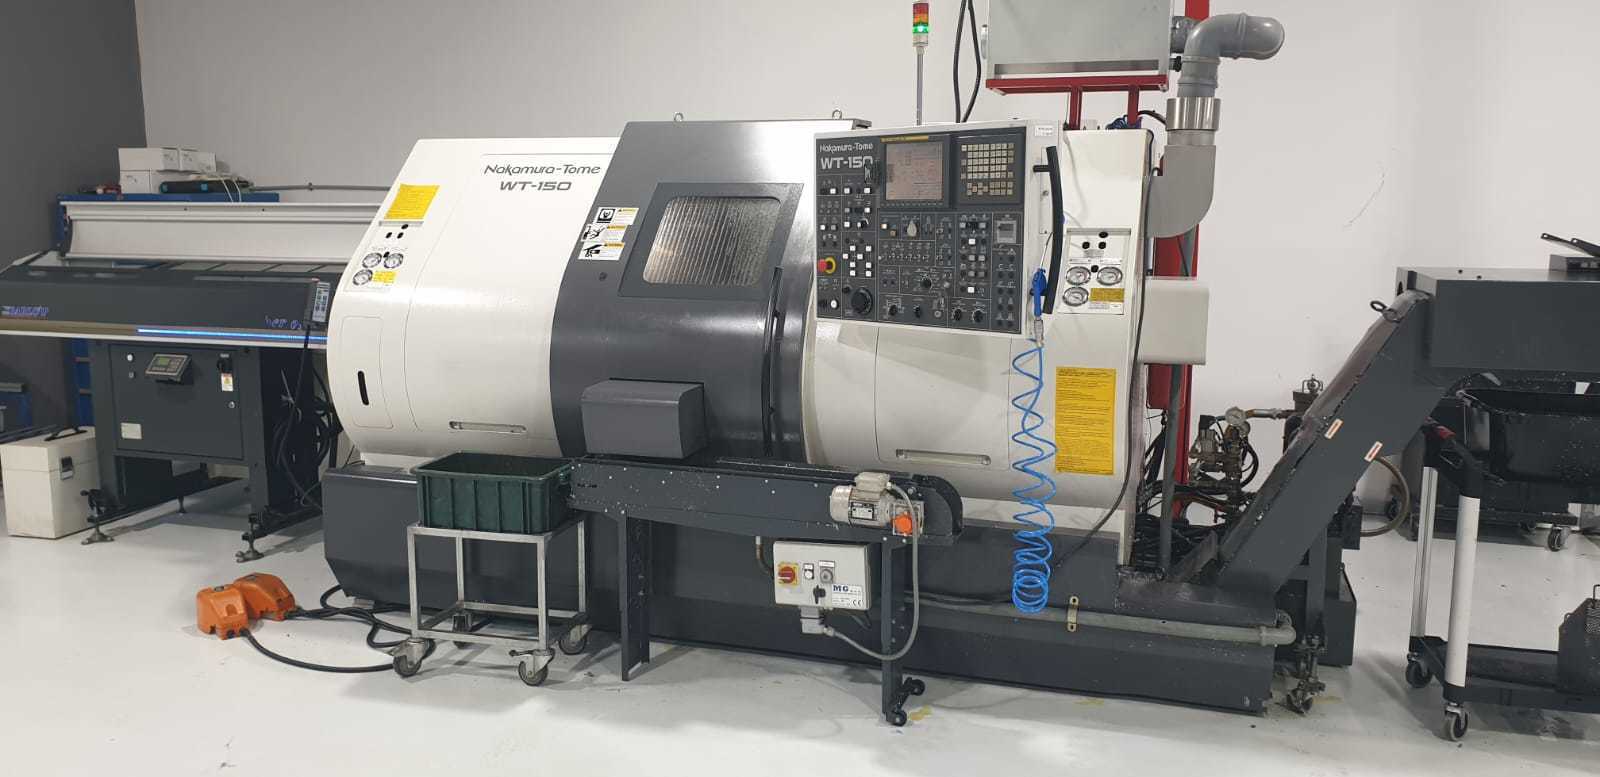 Nakamura-Tome WT-150 (MMY) Multi-Axis CNC Turning Center